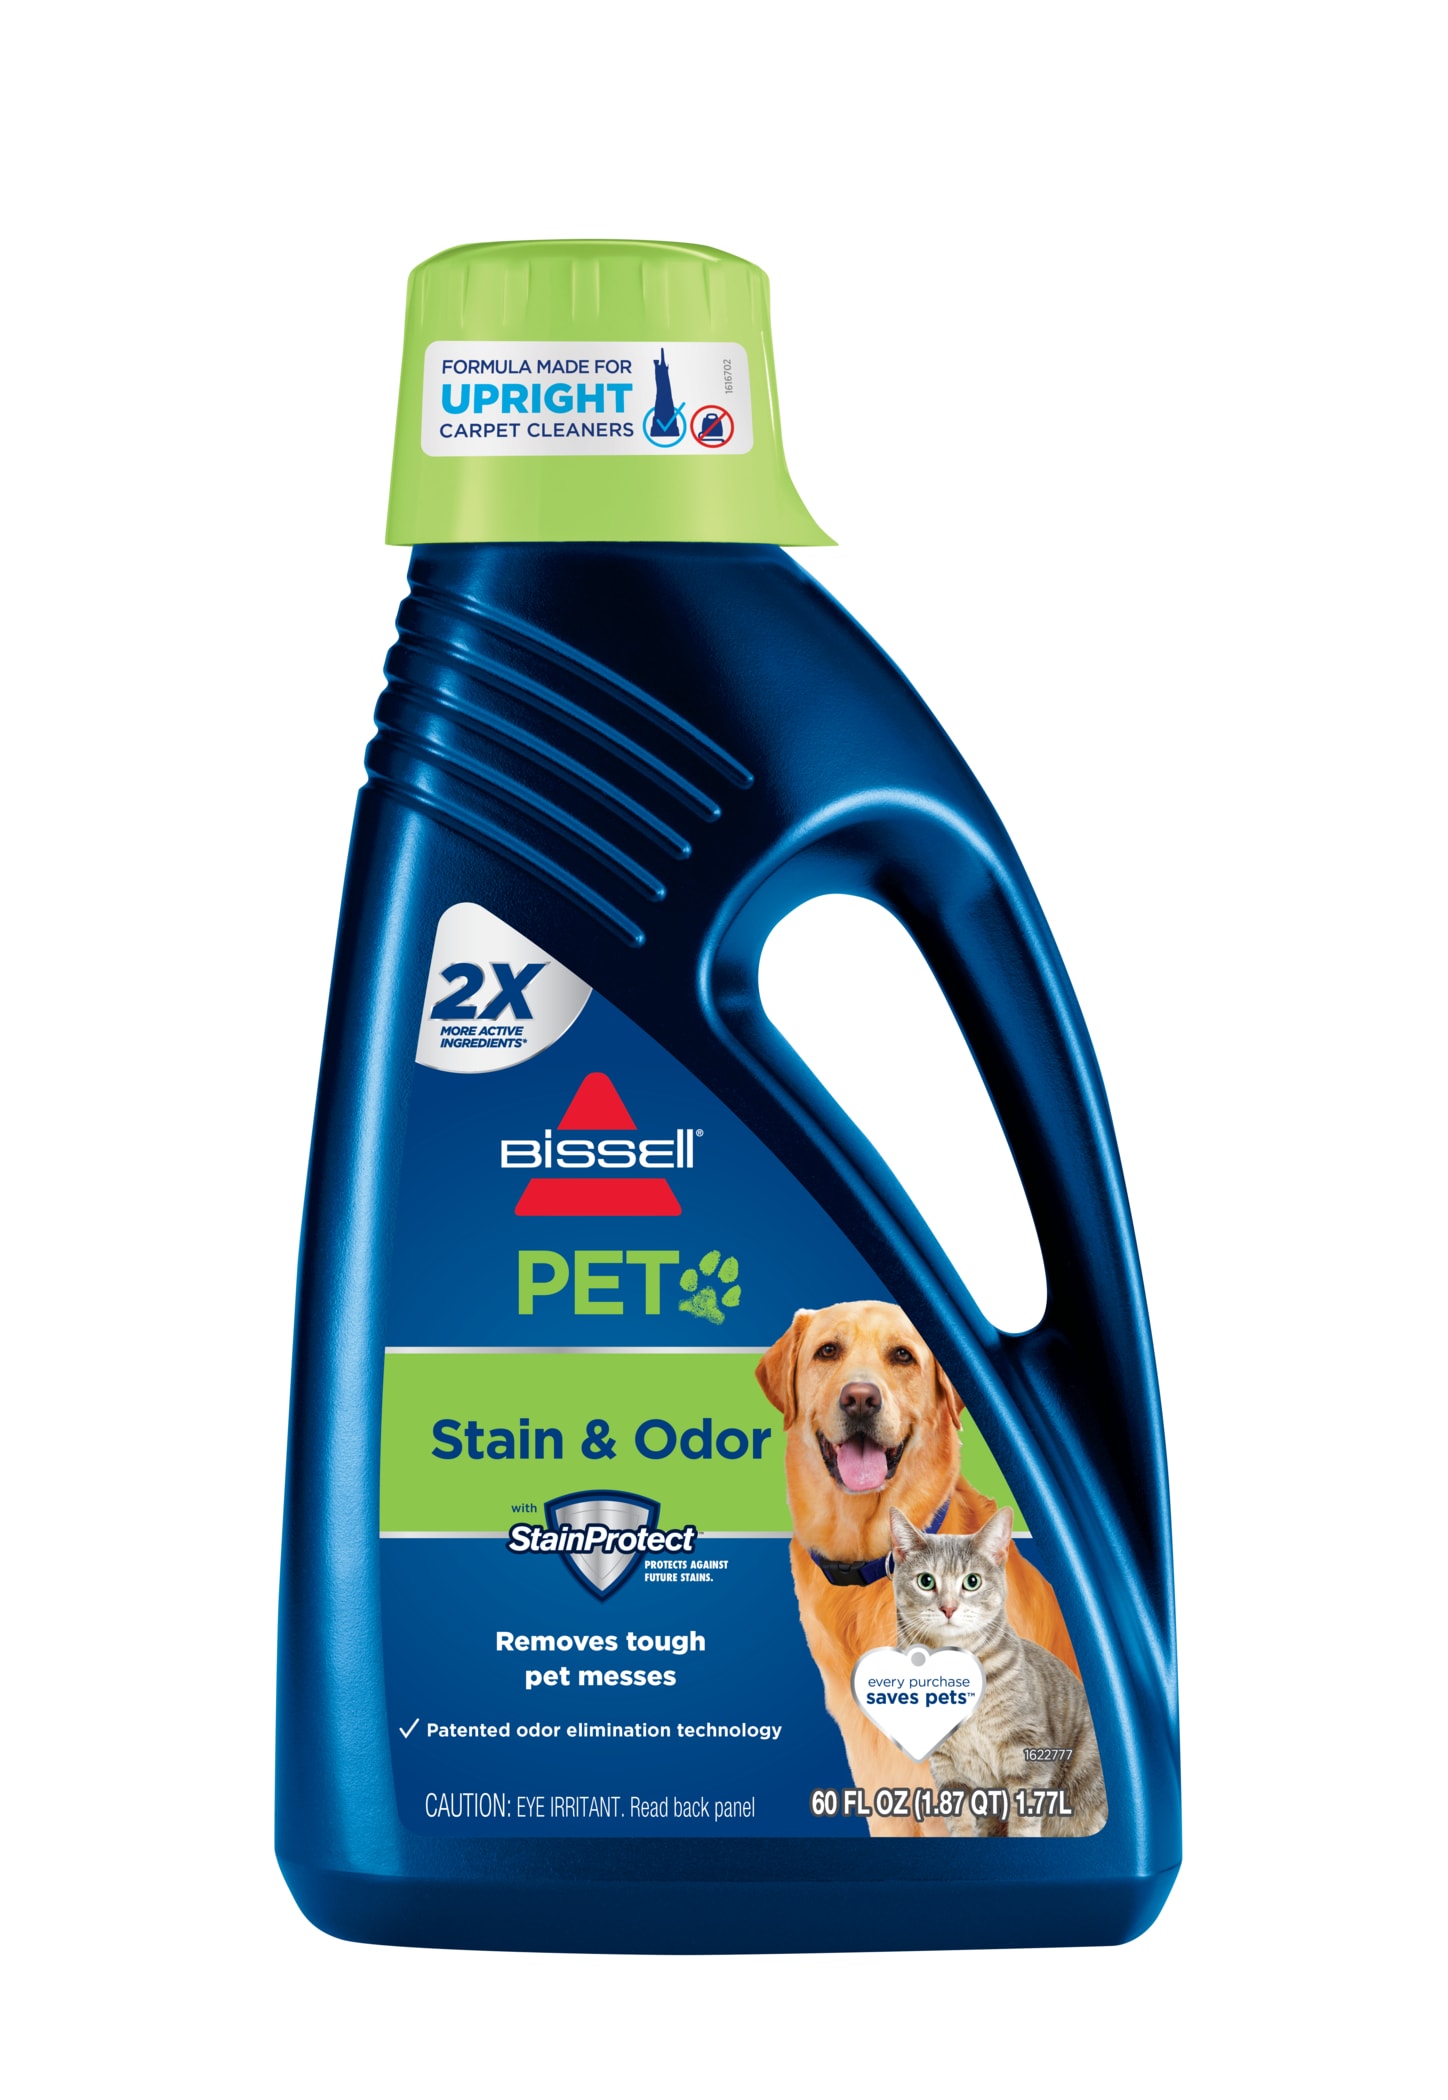 Woolite Free & Clear Pet Stain & Odor Remover 22 Oz, Carpet & Upholstery